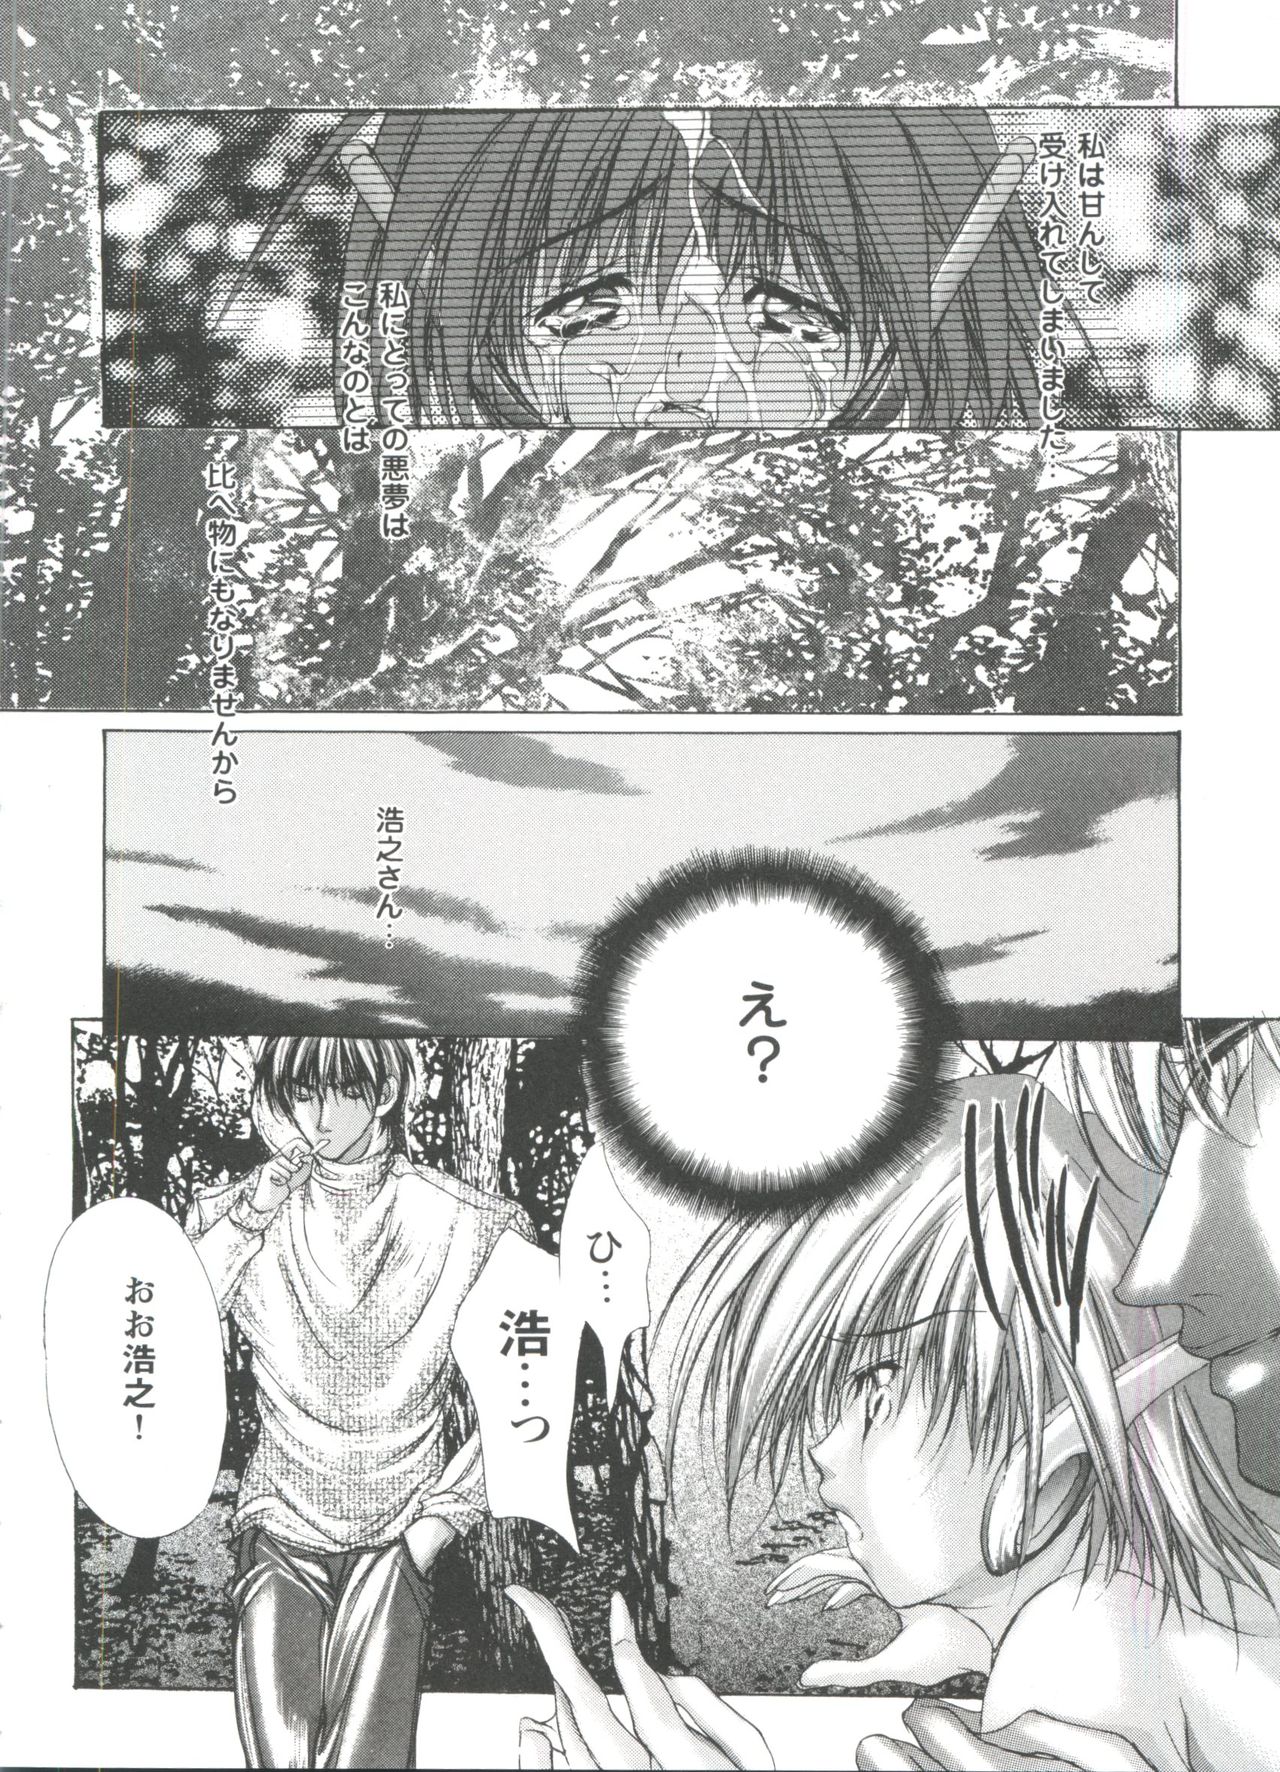 [Anthology] Love Heart 4 (To Heart, White Album) page 22 full